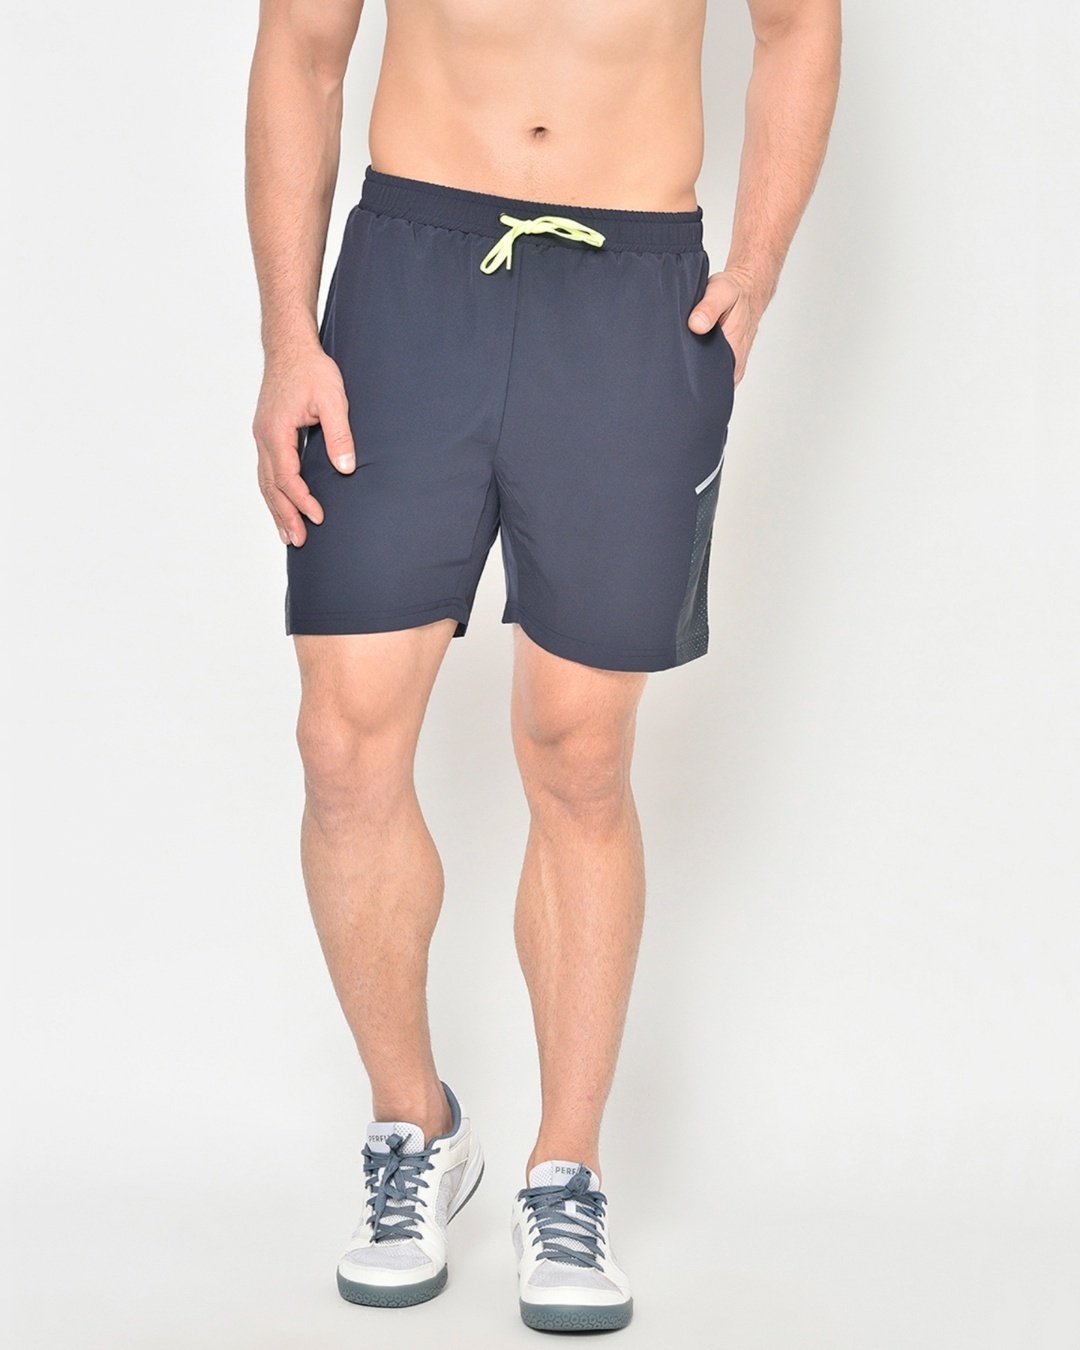 Shop Men's Blue Hydra-Cool Antimicrobial Running Shorts